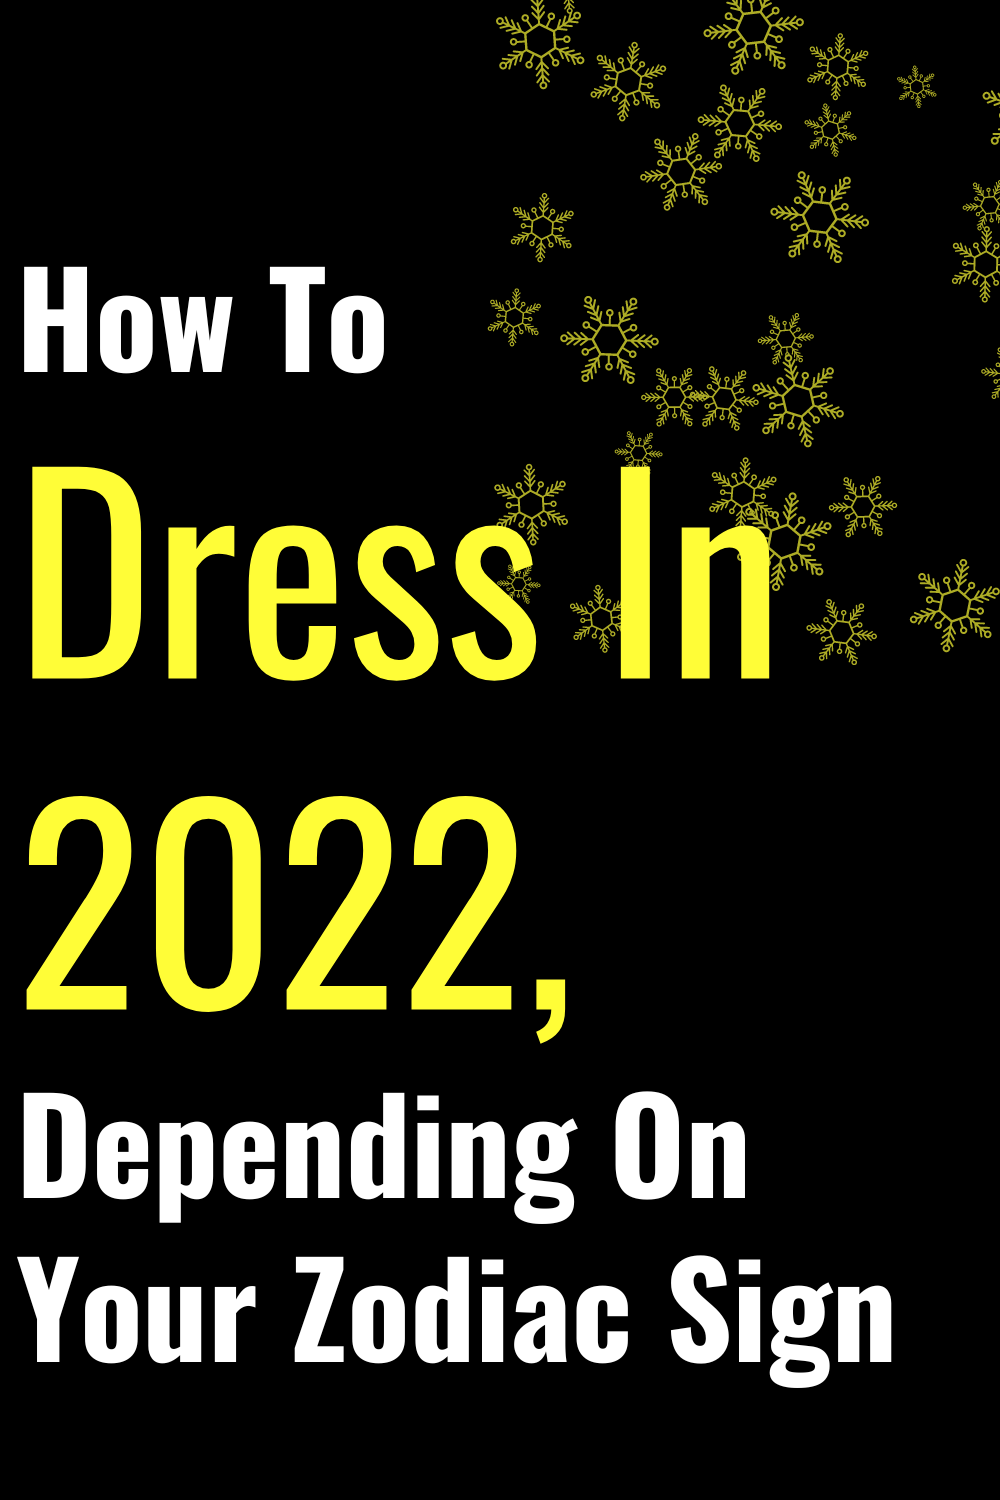 How To Dress In 2022, Depending On Your Zodiac Sign